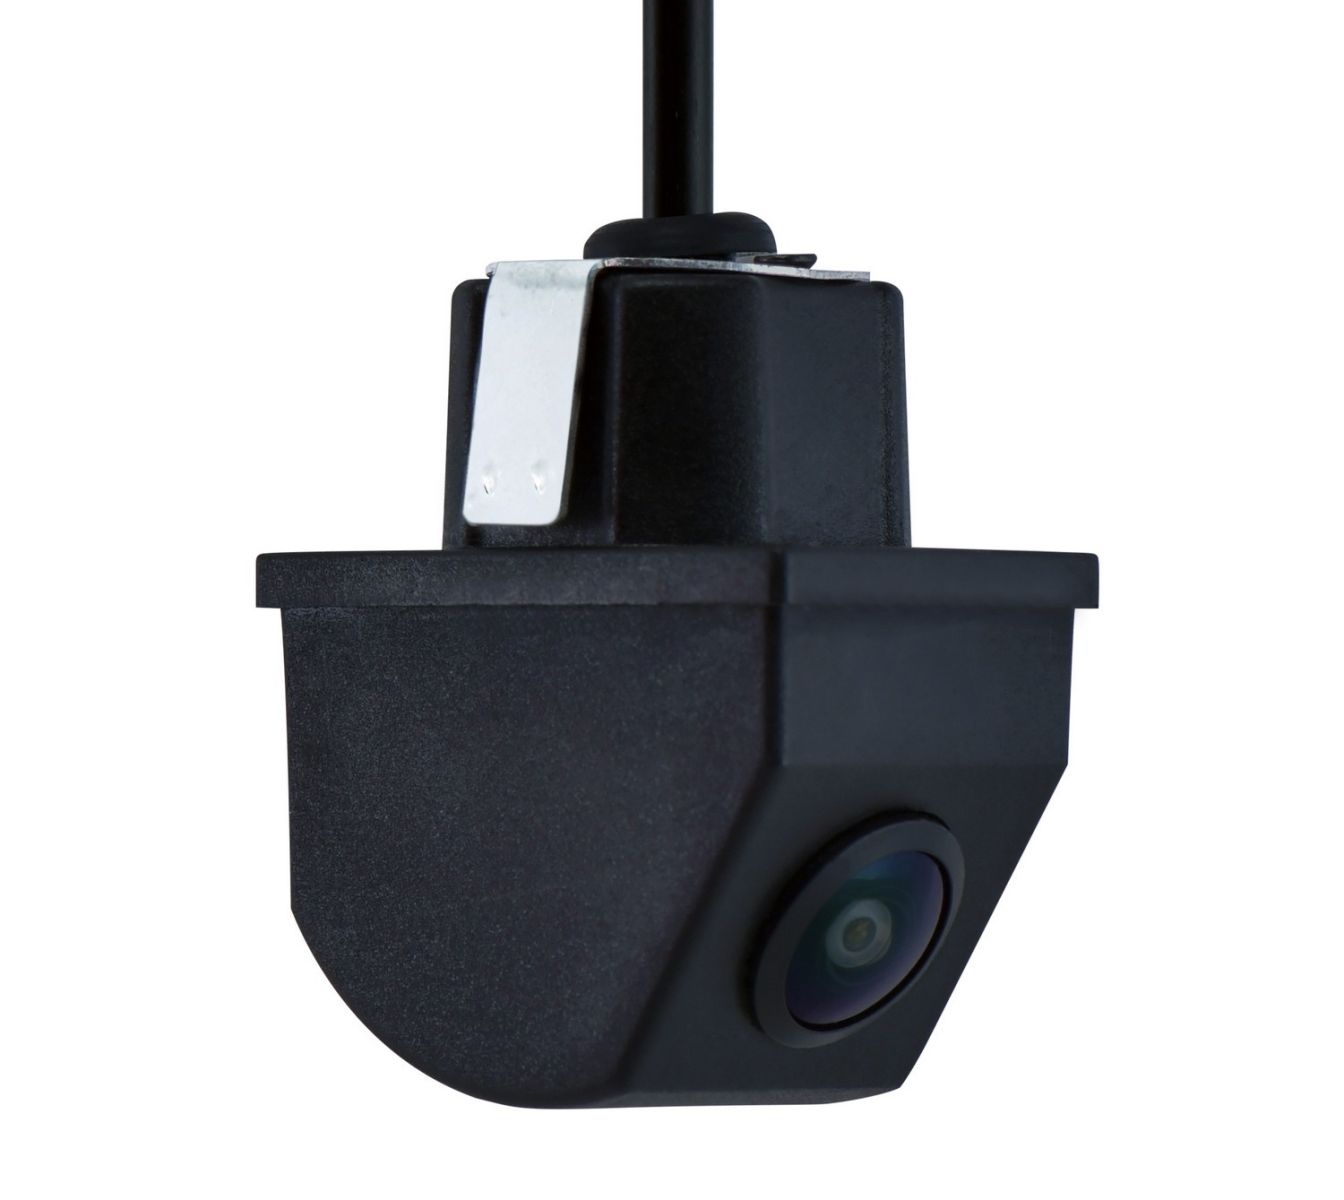 HD rear view camera for cars and trucks or semi-trailers